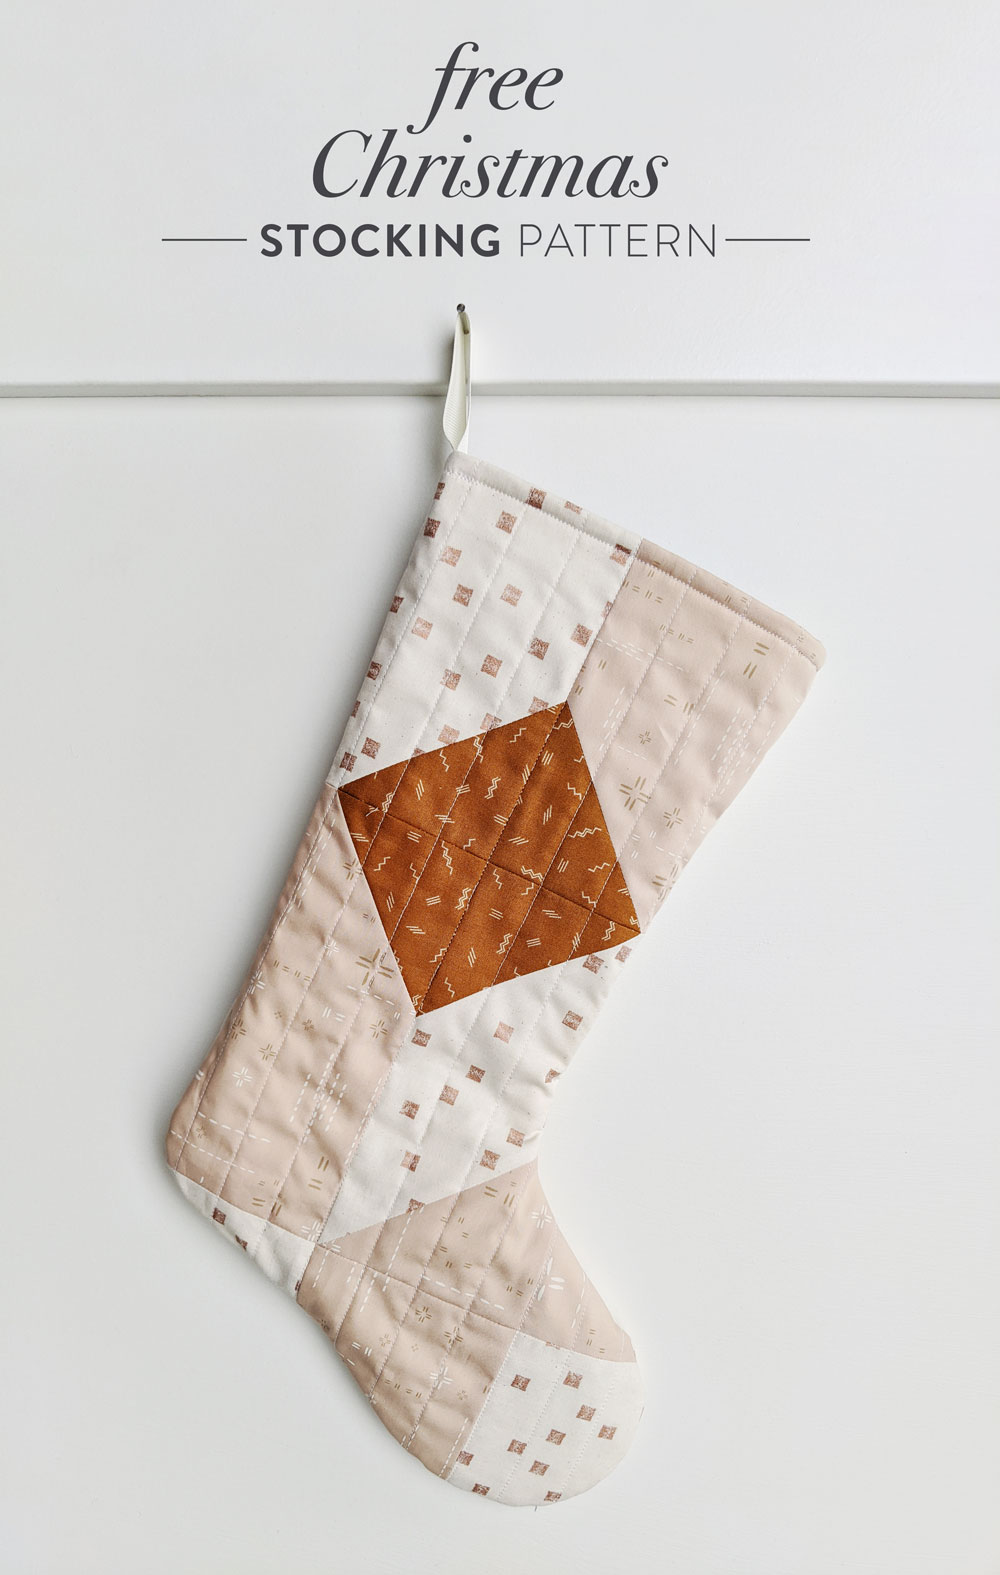 A free quilted Christmas stocking pattern right in time for the holidays! Sew a simple, modern stocking with this step by step tutorial. suzyquilts.com #DIYstocking #quilttutorial